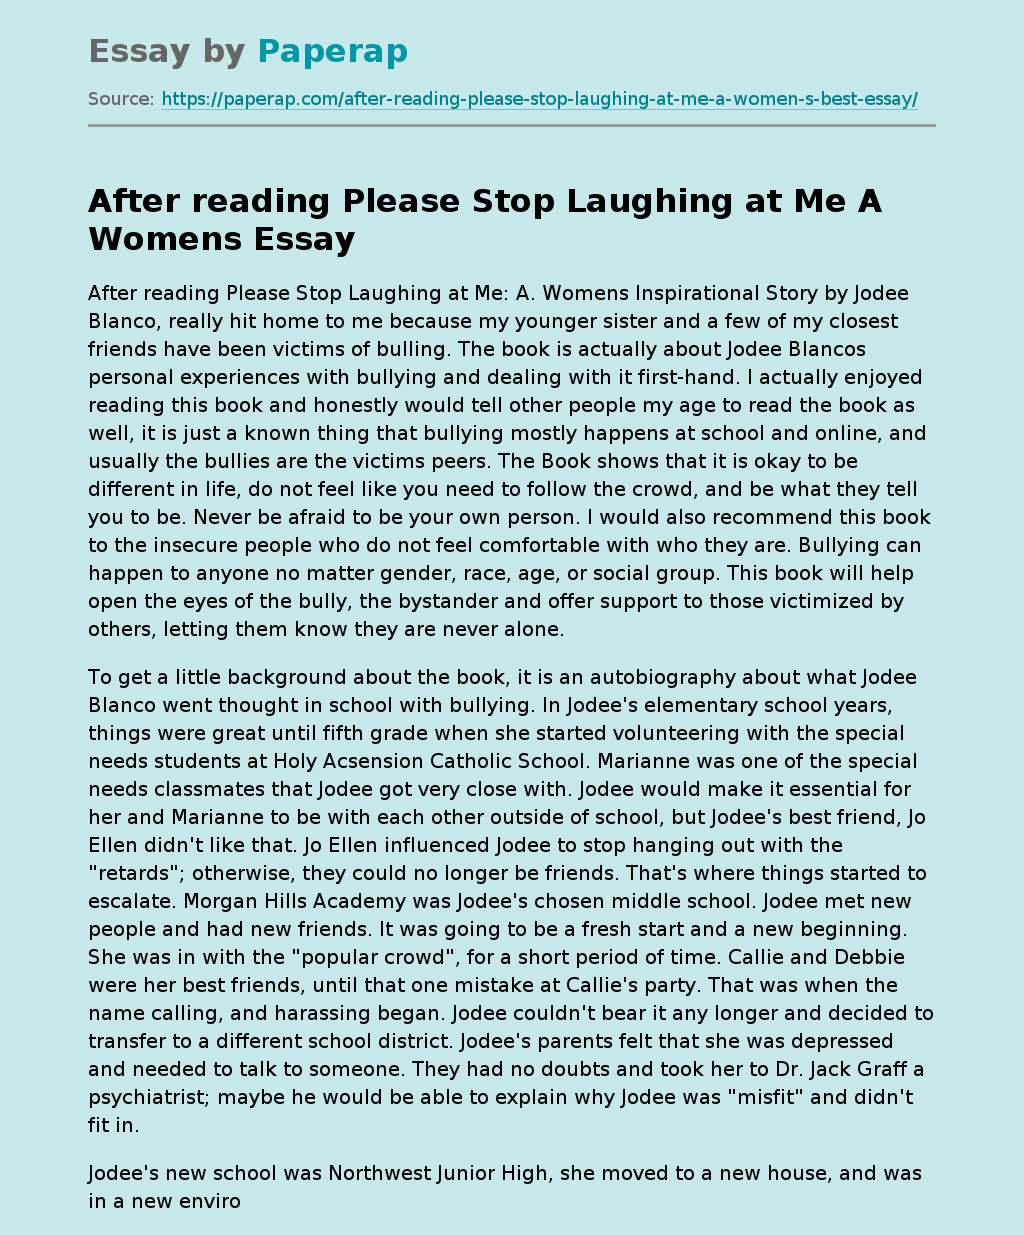 After reading Please Stop Laughing at Me A Womens